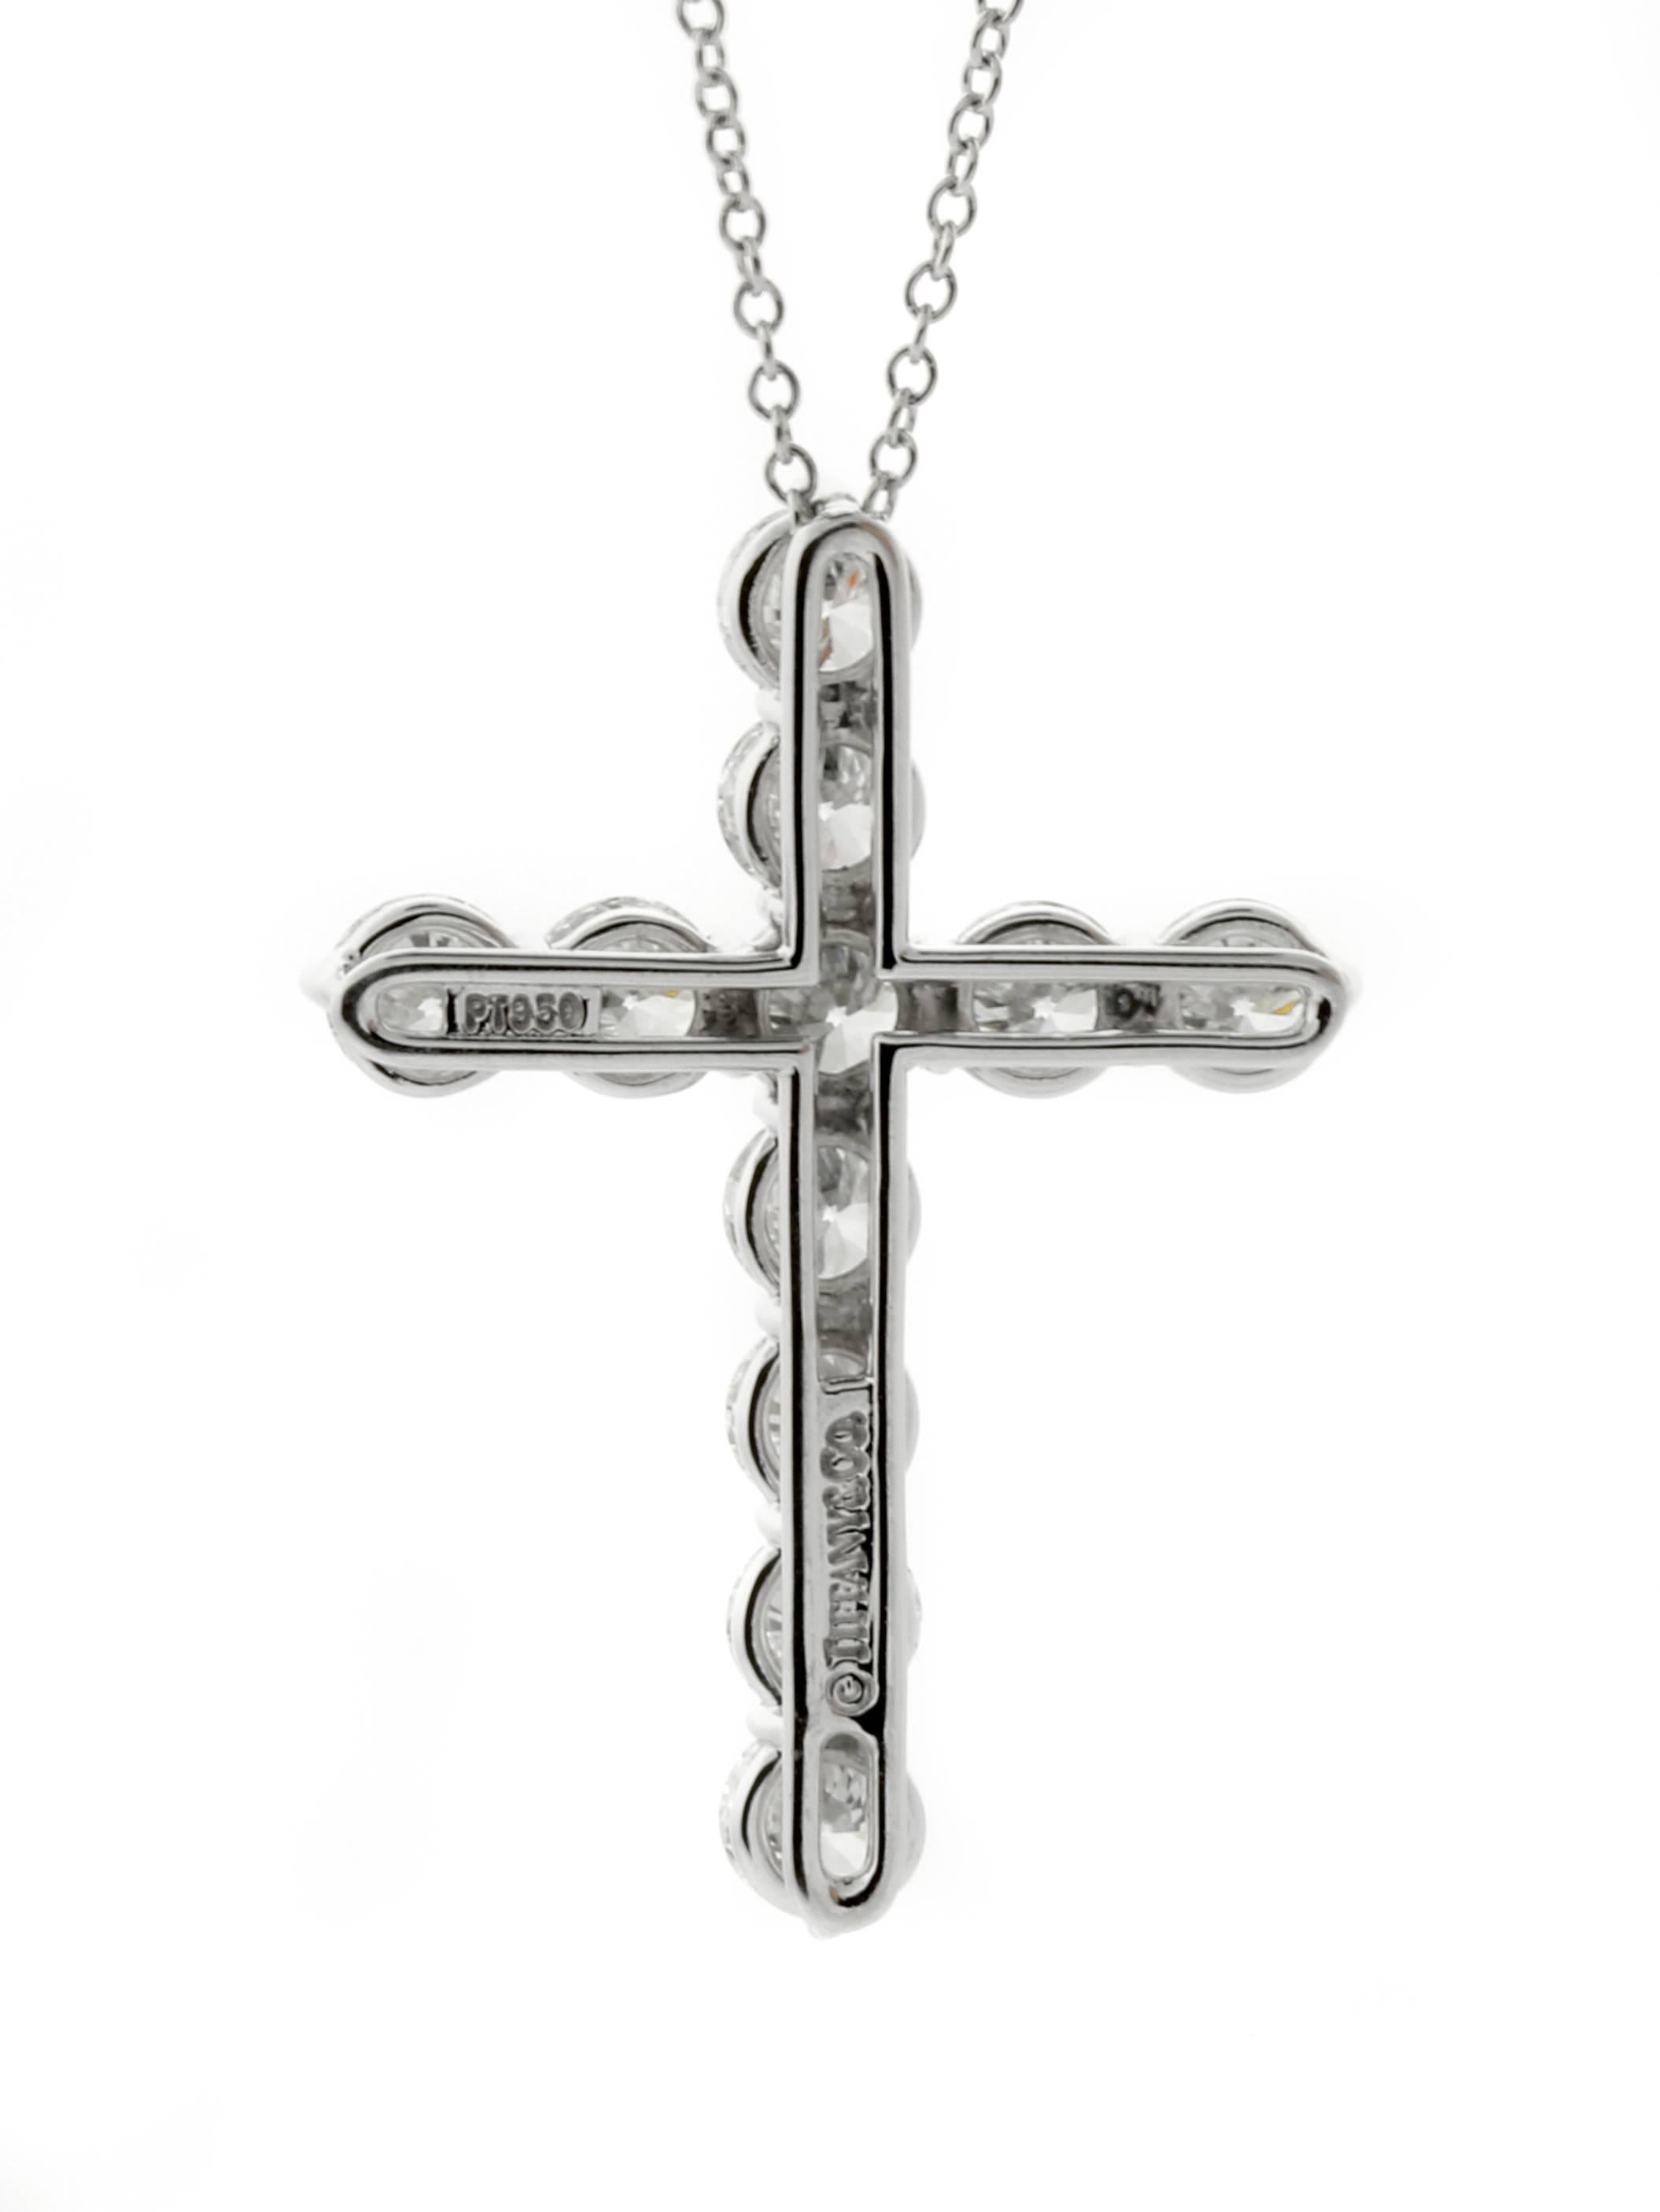 A timeless platinum diamond cross necklace by Tiffany & Co featuring 2.53ct of Vs round brilliant cut diamonds. 

The pendant measures .84